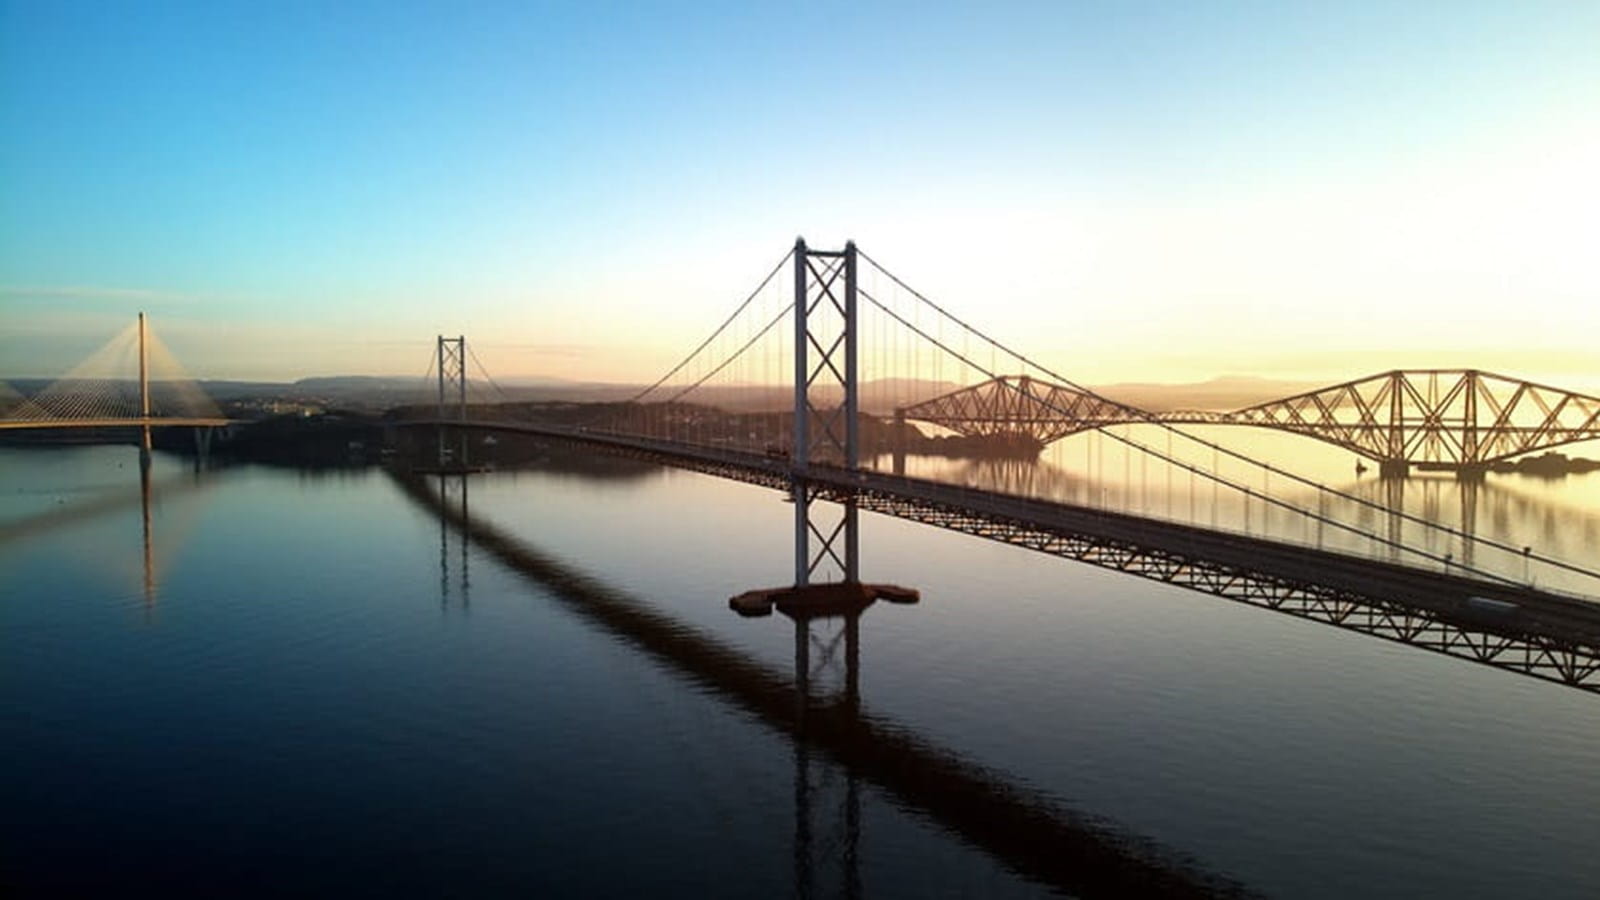 The Firth of Forth Bridge